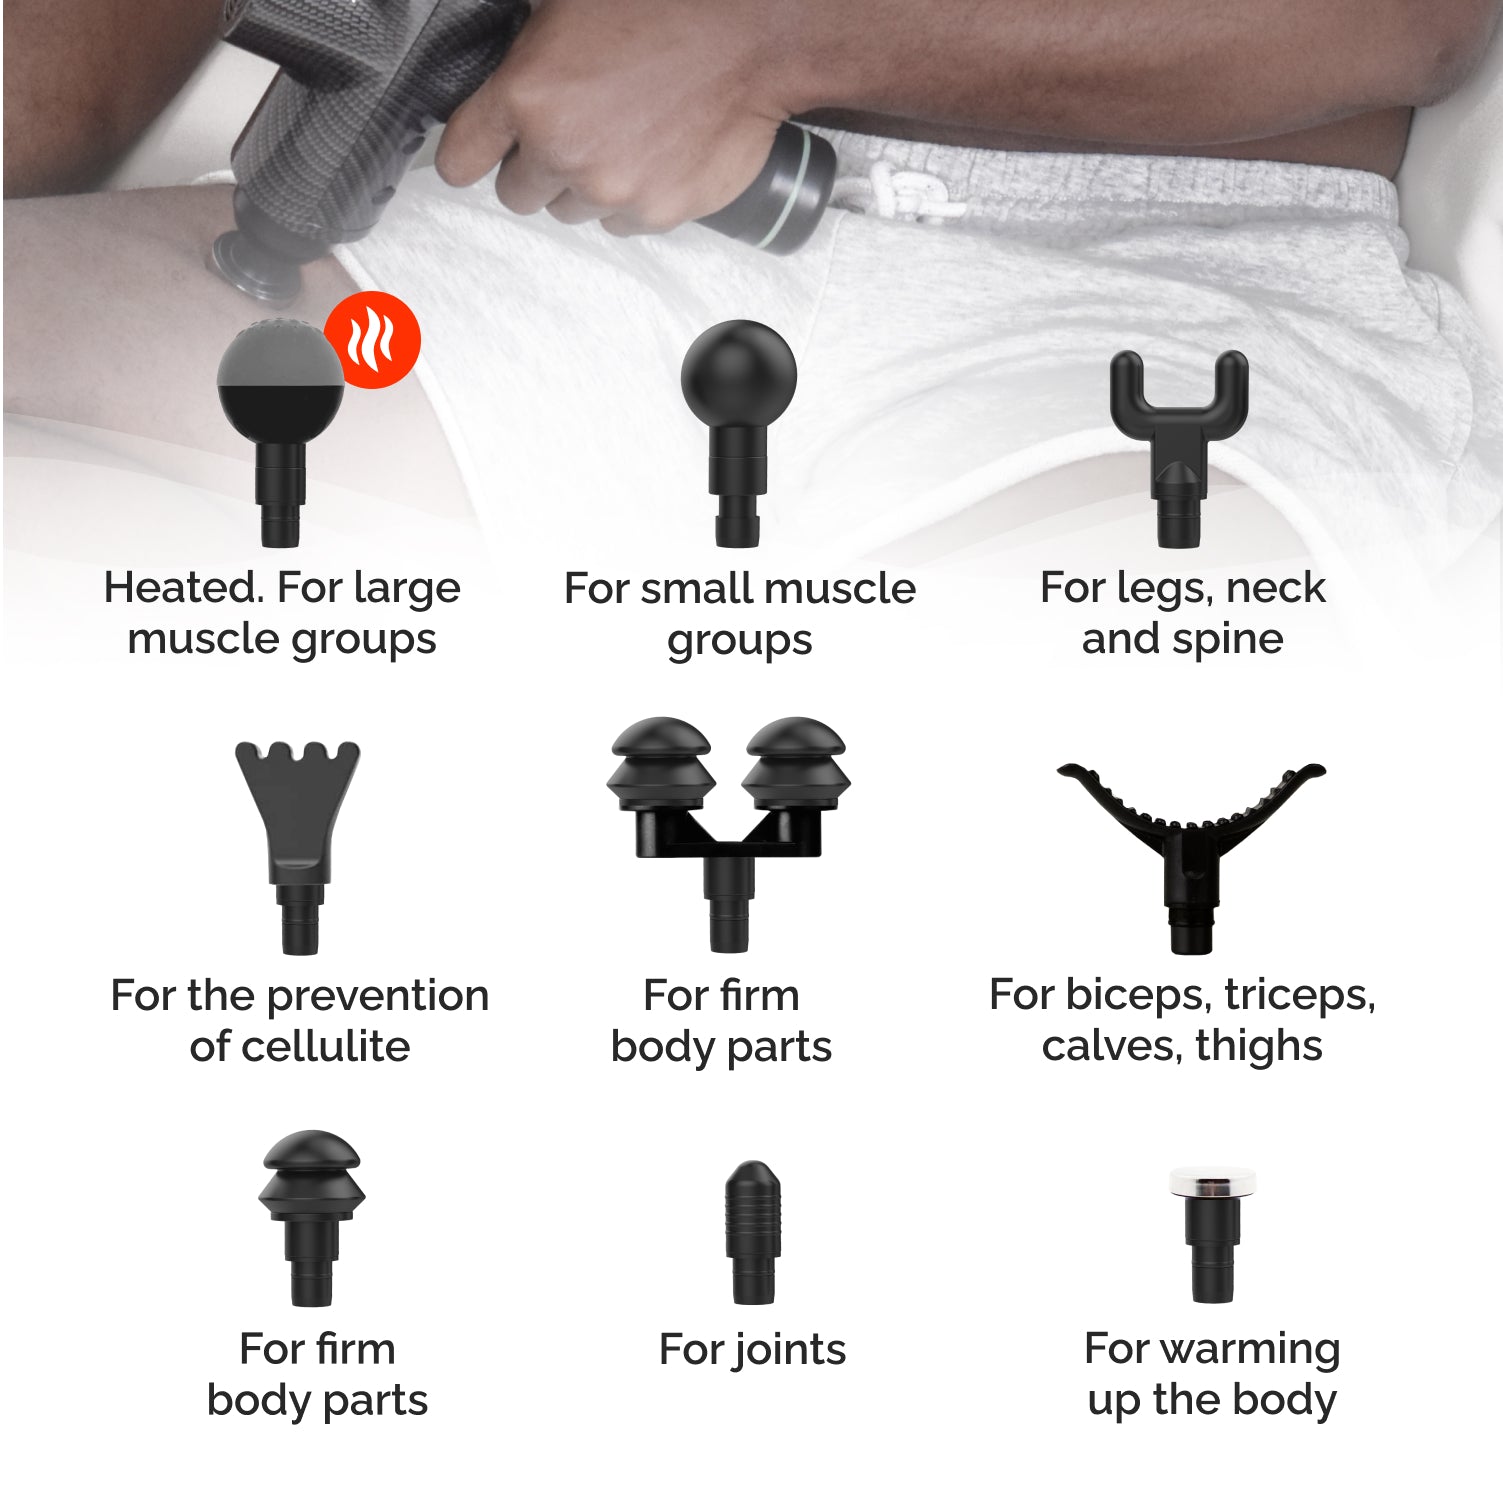 How to Use a Massage Gun on Specific Body Parts